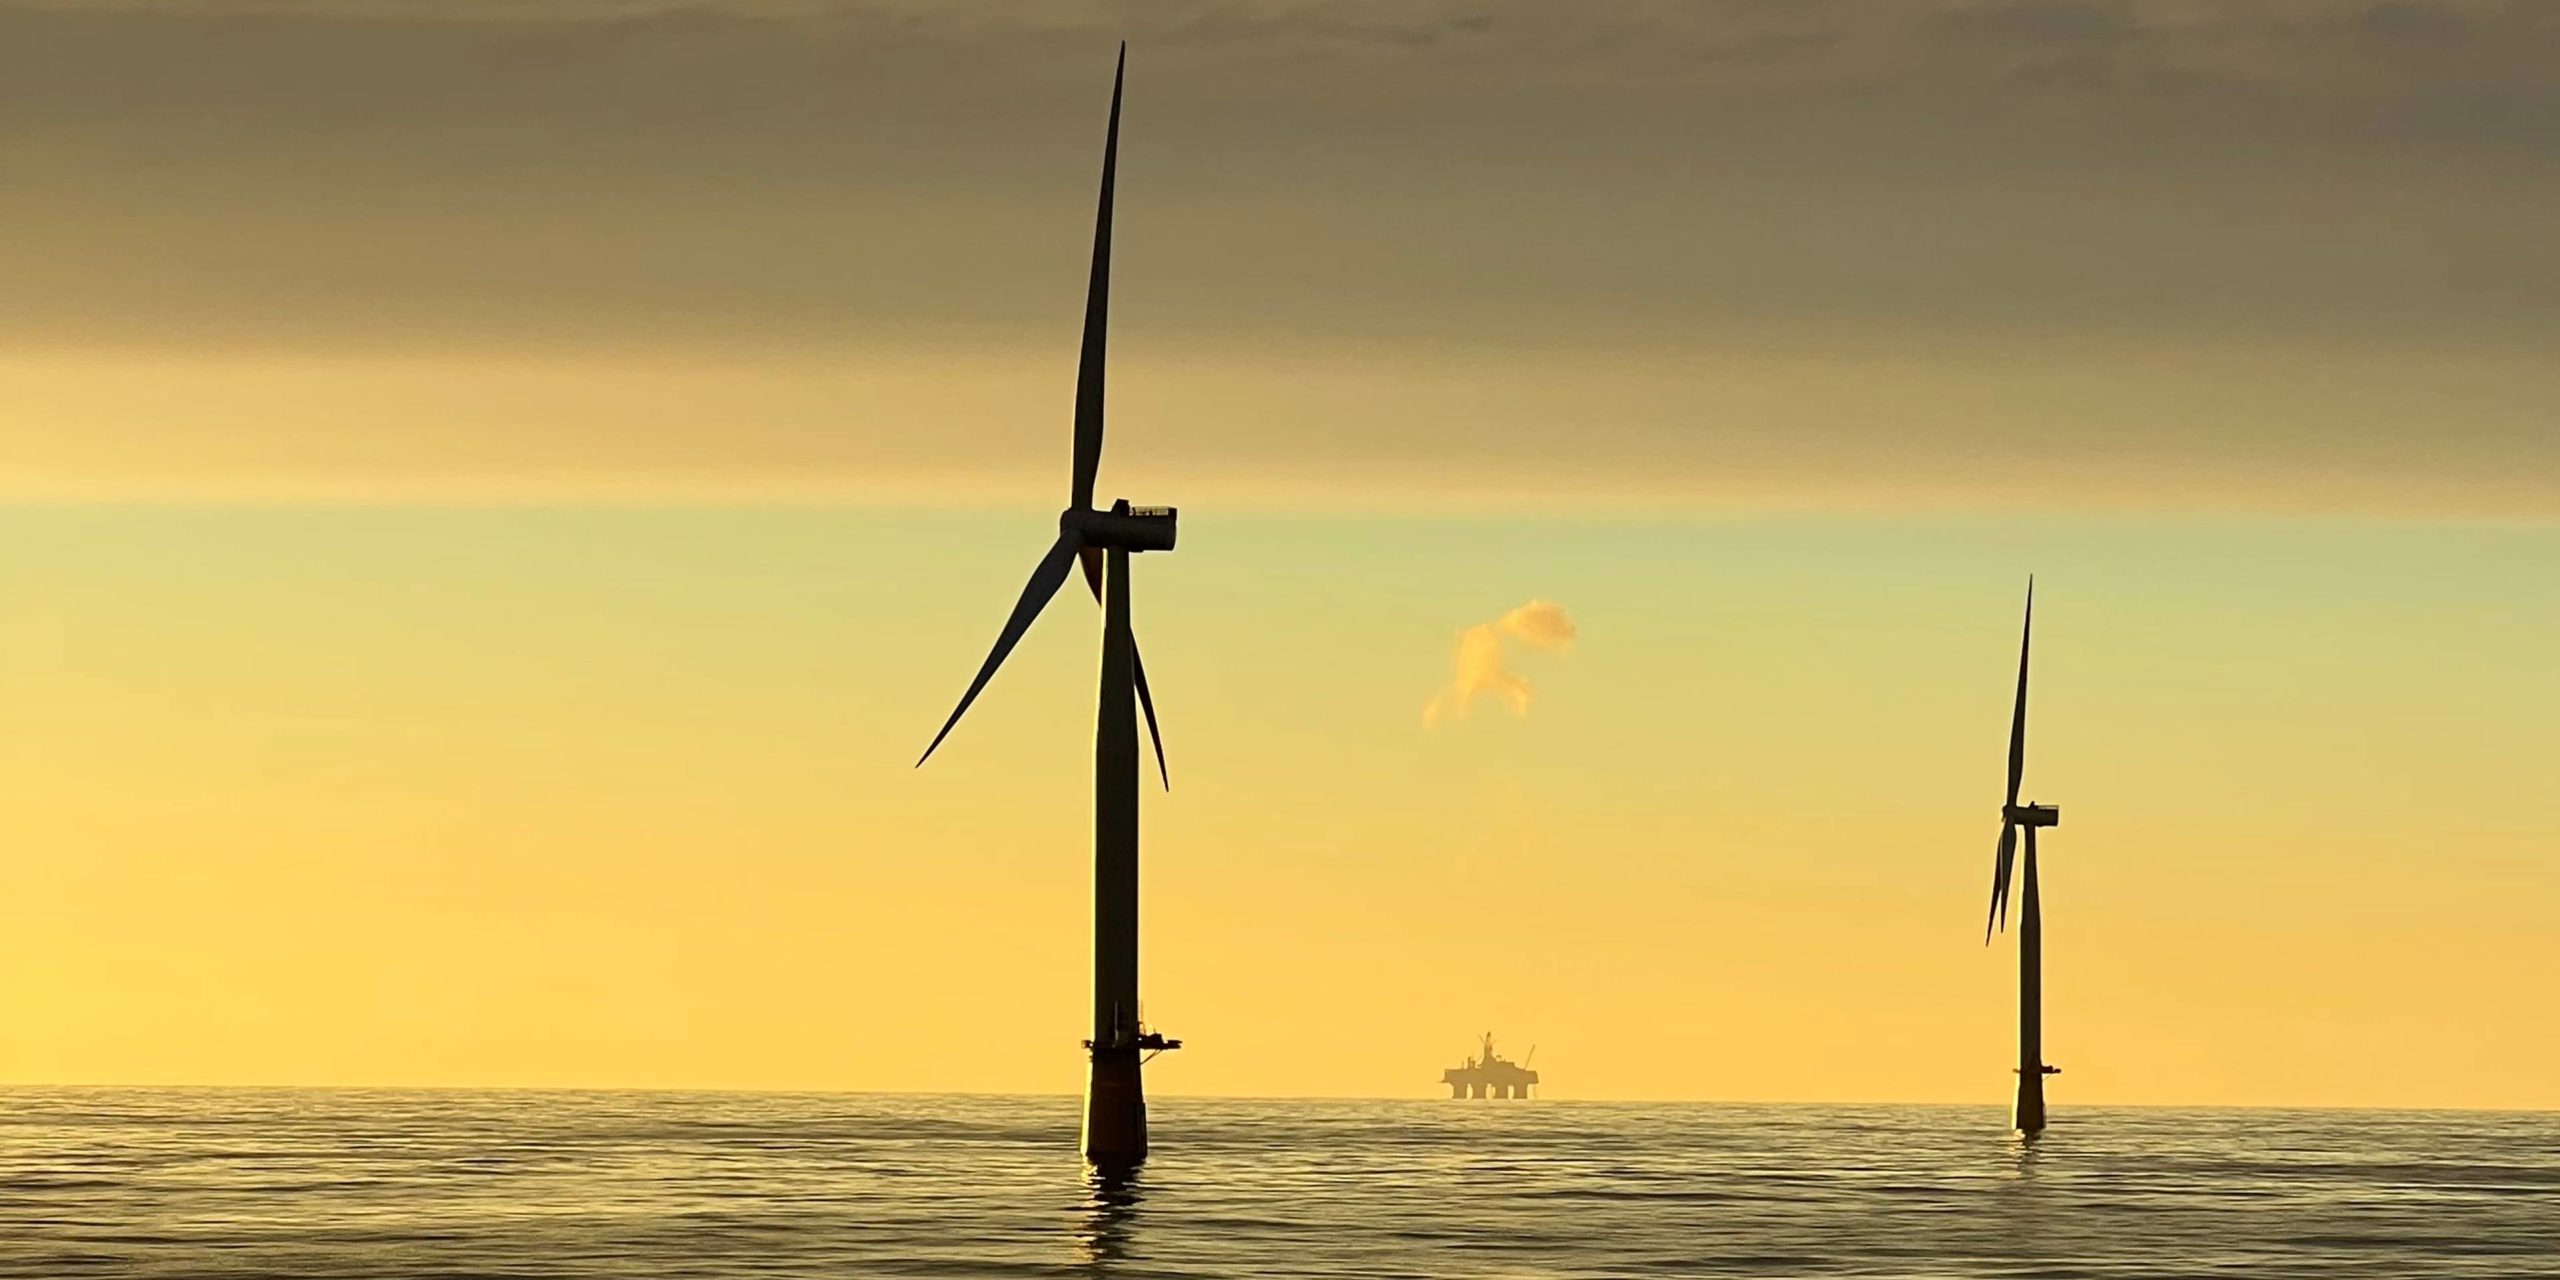 Equinor Begins Power Production at Hywind Tampen, Norway’s First Floating Offshore Wind Farm